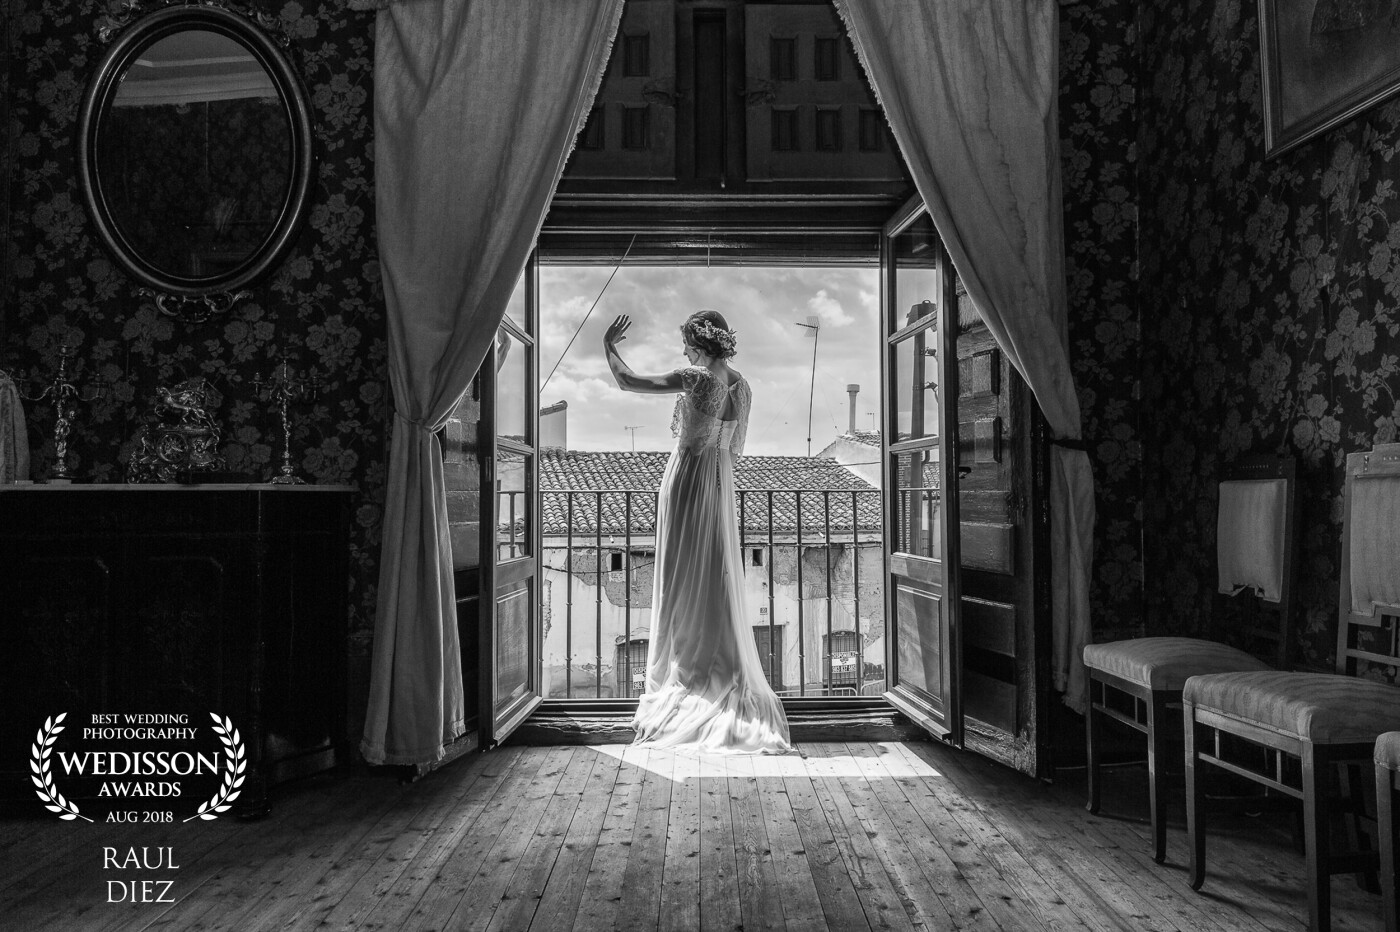 This photo takes us to another time, a house with more than 2 centuries located in the wine-growing area of ​​Rueda. spontaneous moment of the bride already ready and greeting friends from the balcony